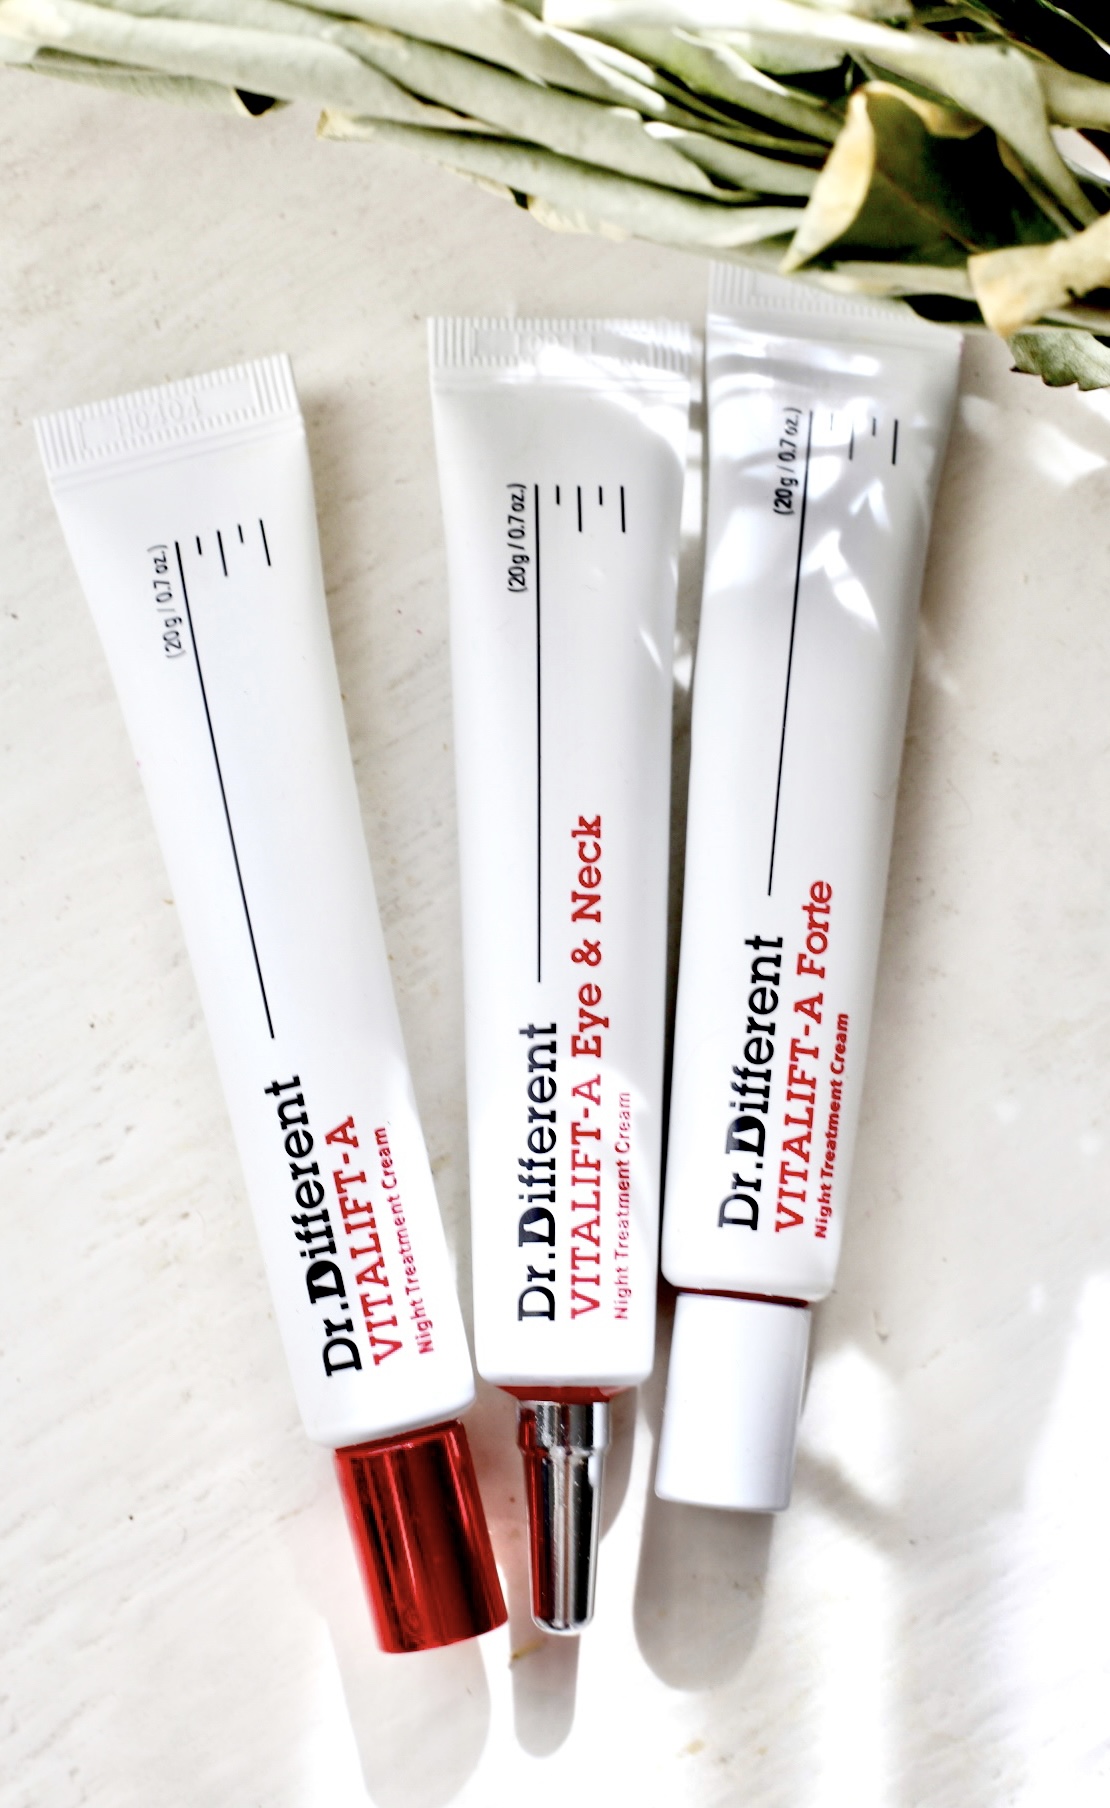 Dr Different Review: K-Beauty Retinol